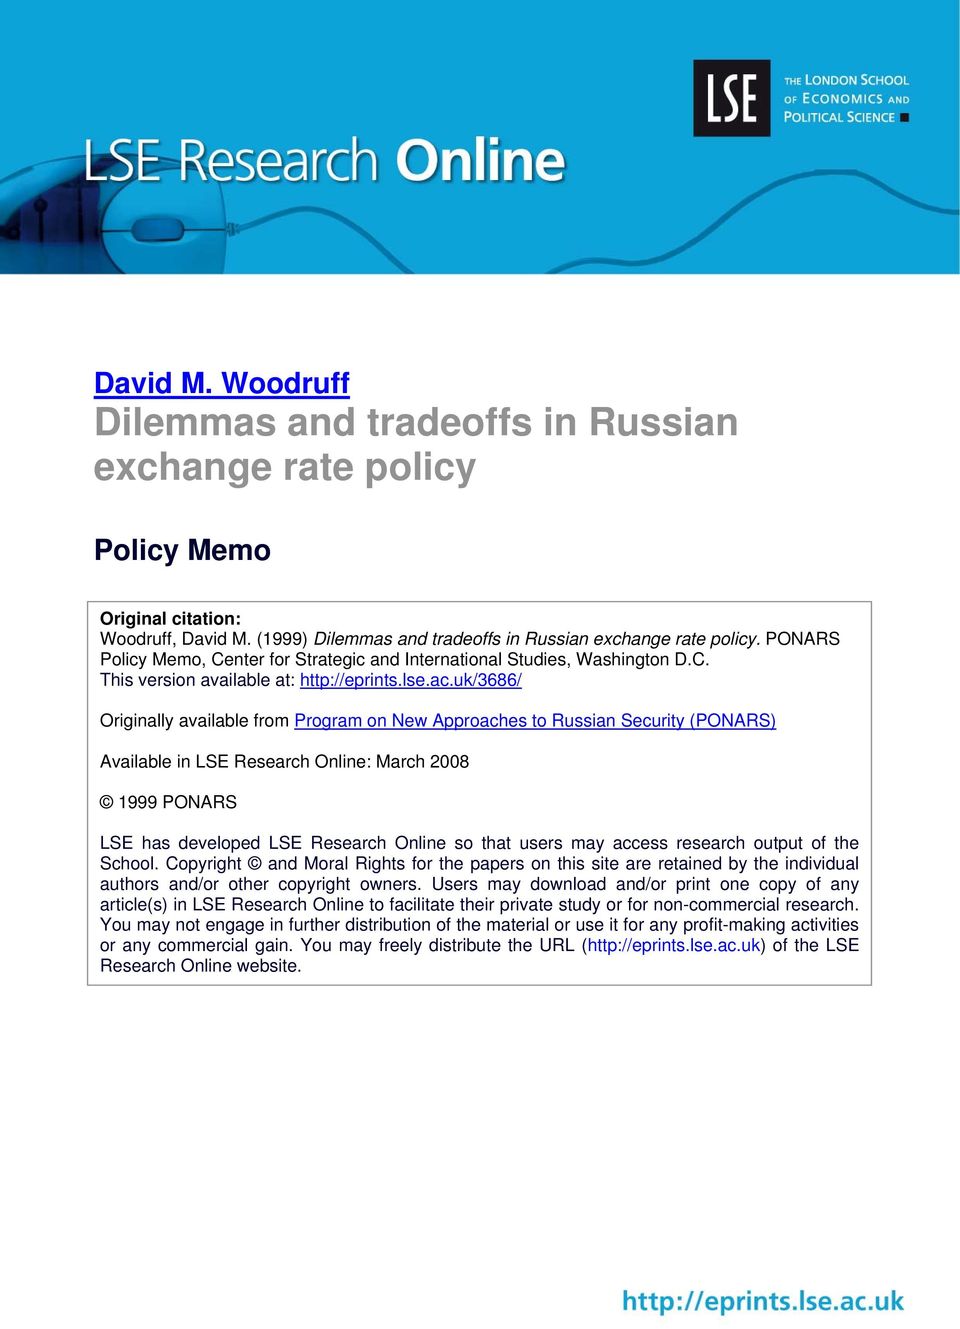 uk/3686/ Originally available from Program on New Approaches to Russian Security (PONARS) Available in LSE Research Online: March 2008 1999 PONARS LSE has developed LSE Research Online so that users